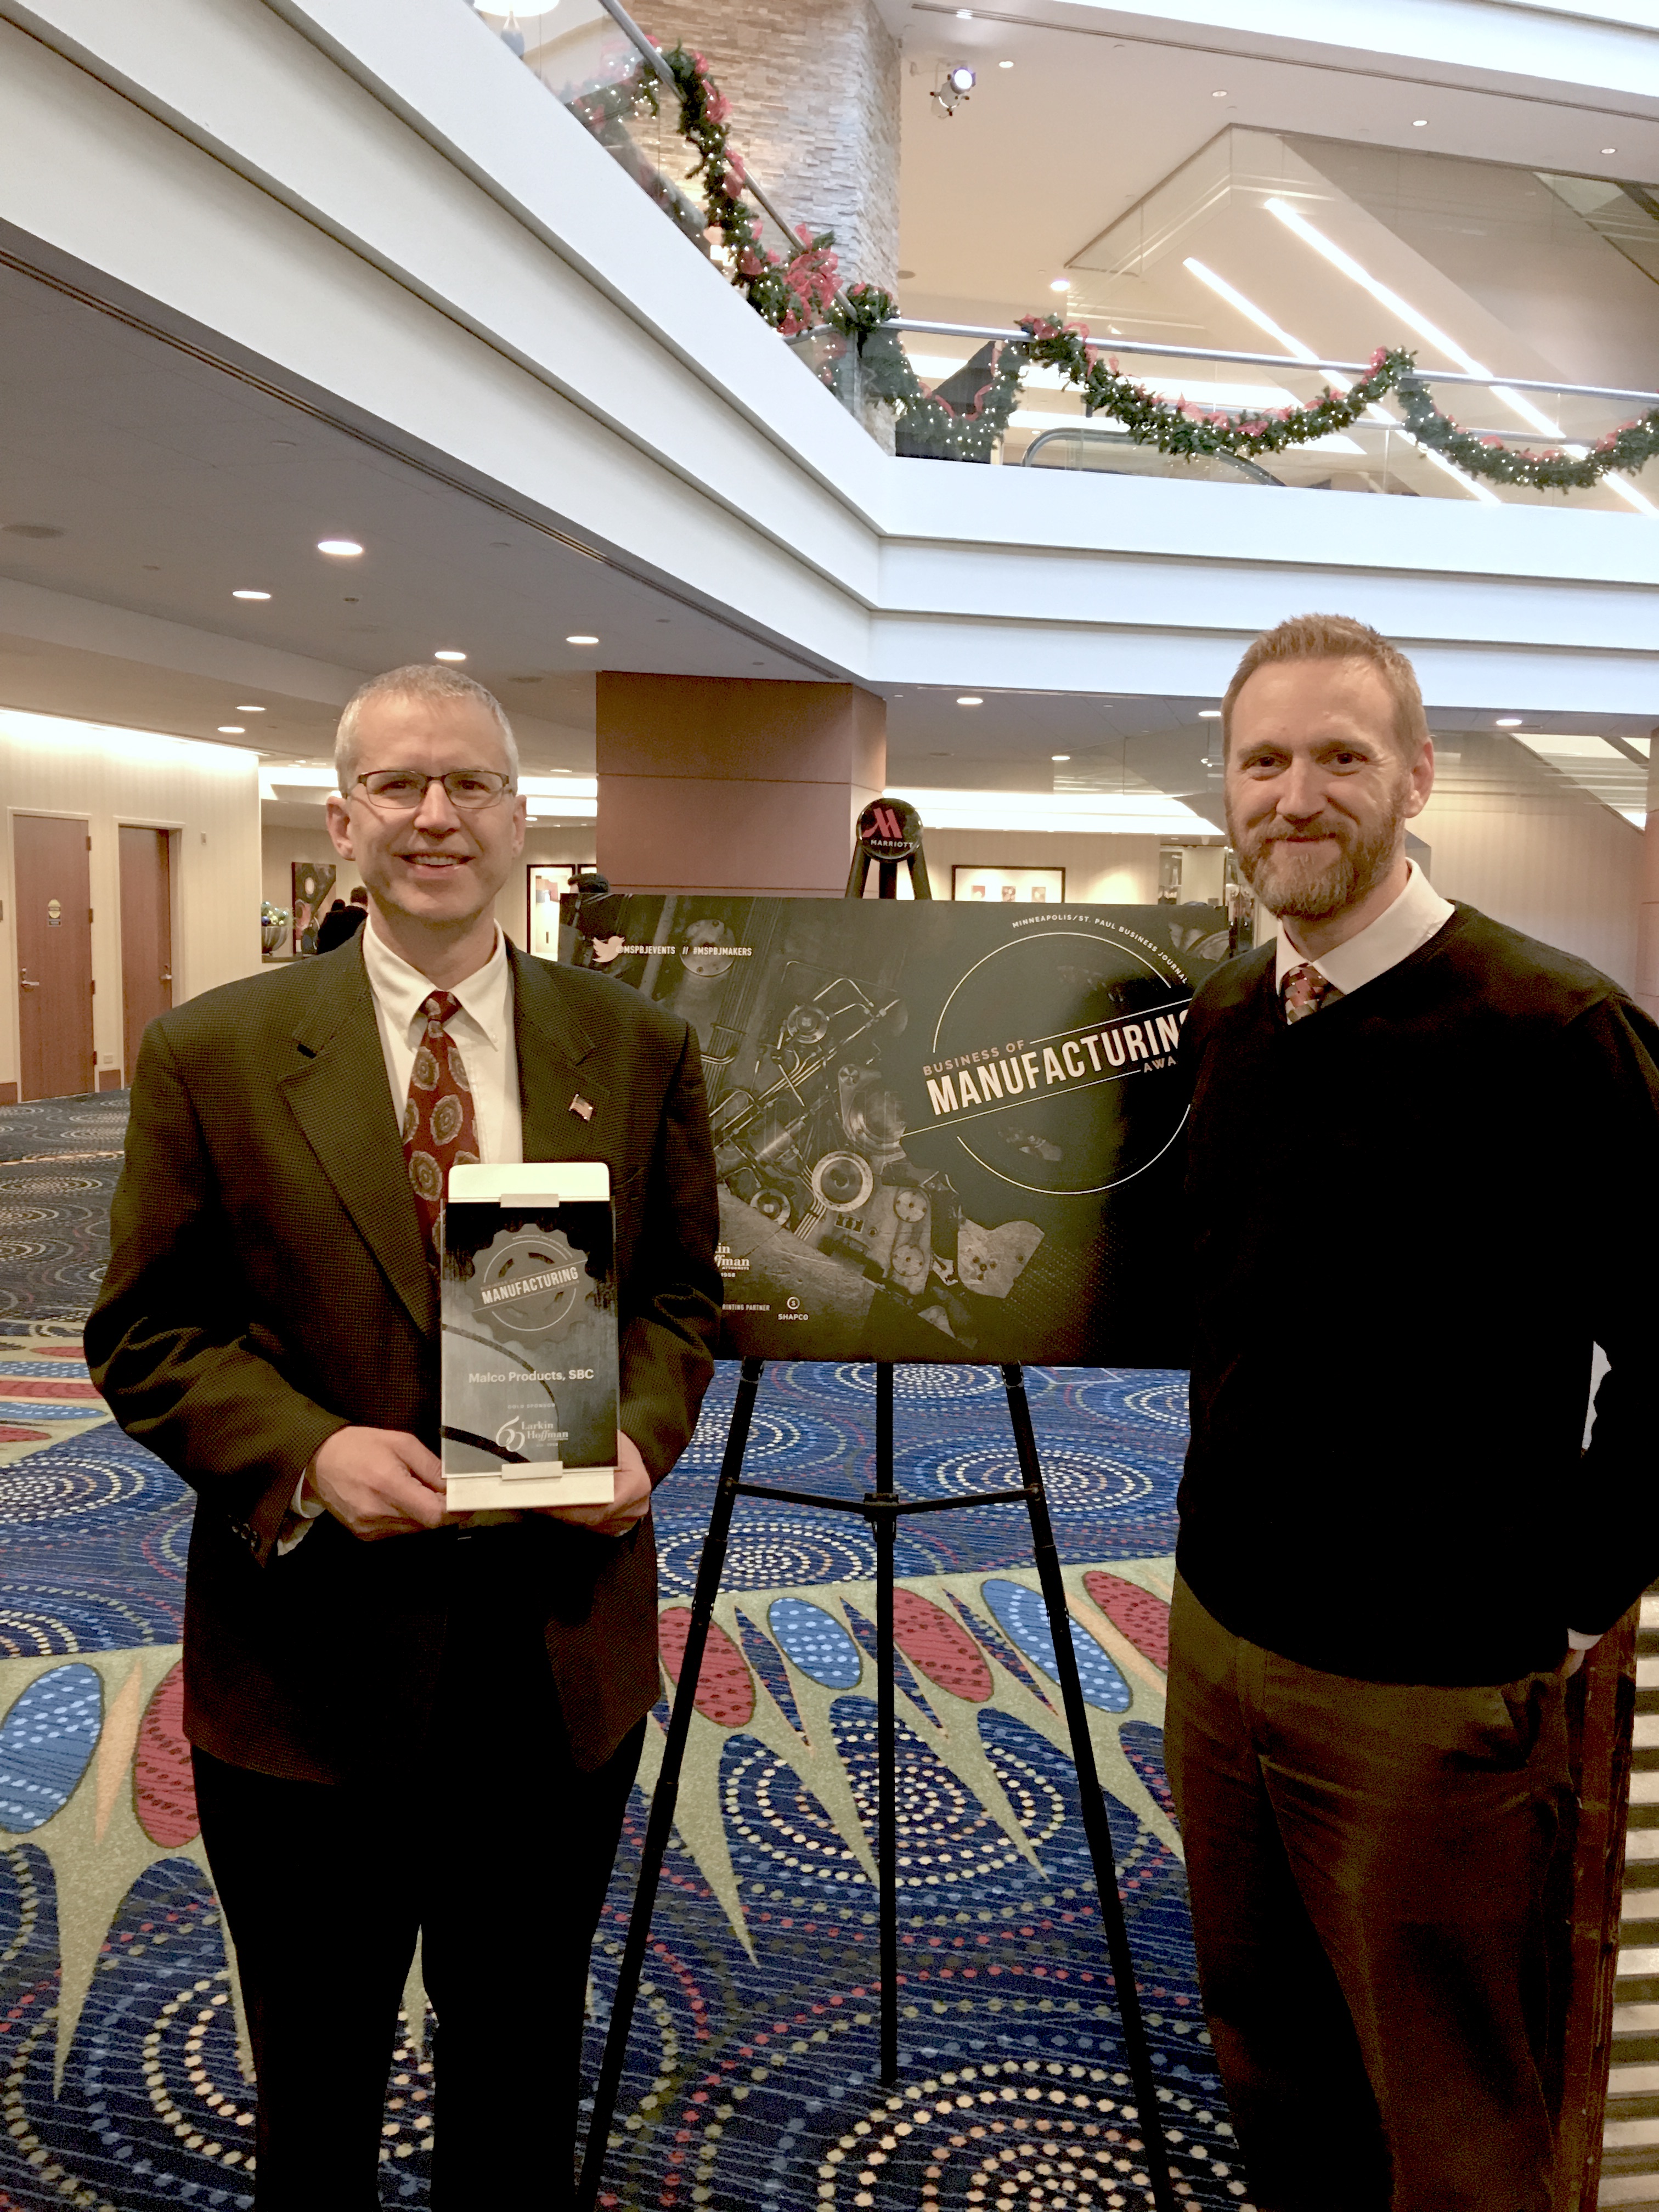 Malco President Mardon Quandt and Human Resource Manager Kirk Langbehn, accepting the 2018 Medium Manufacturer of the Year Award.